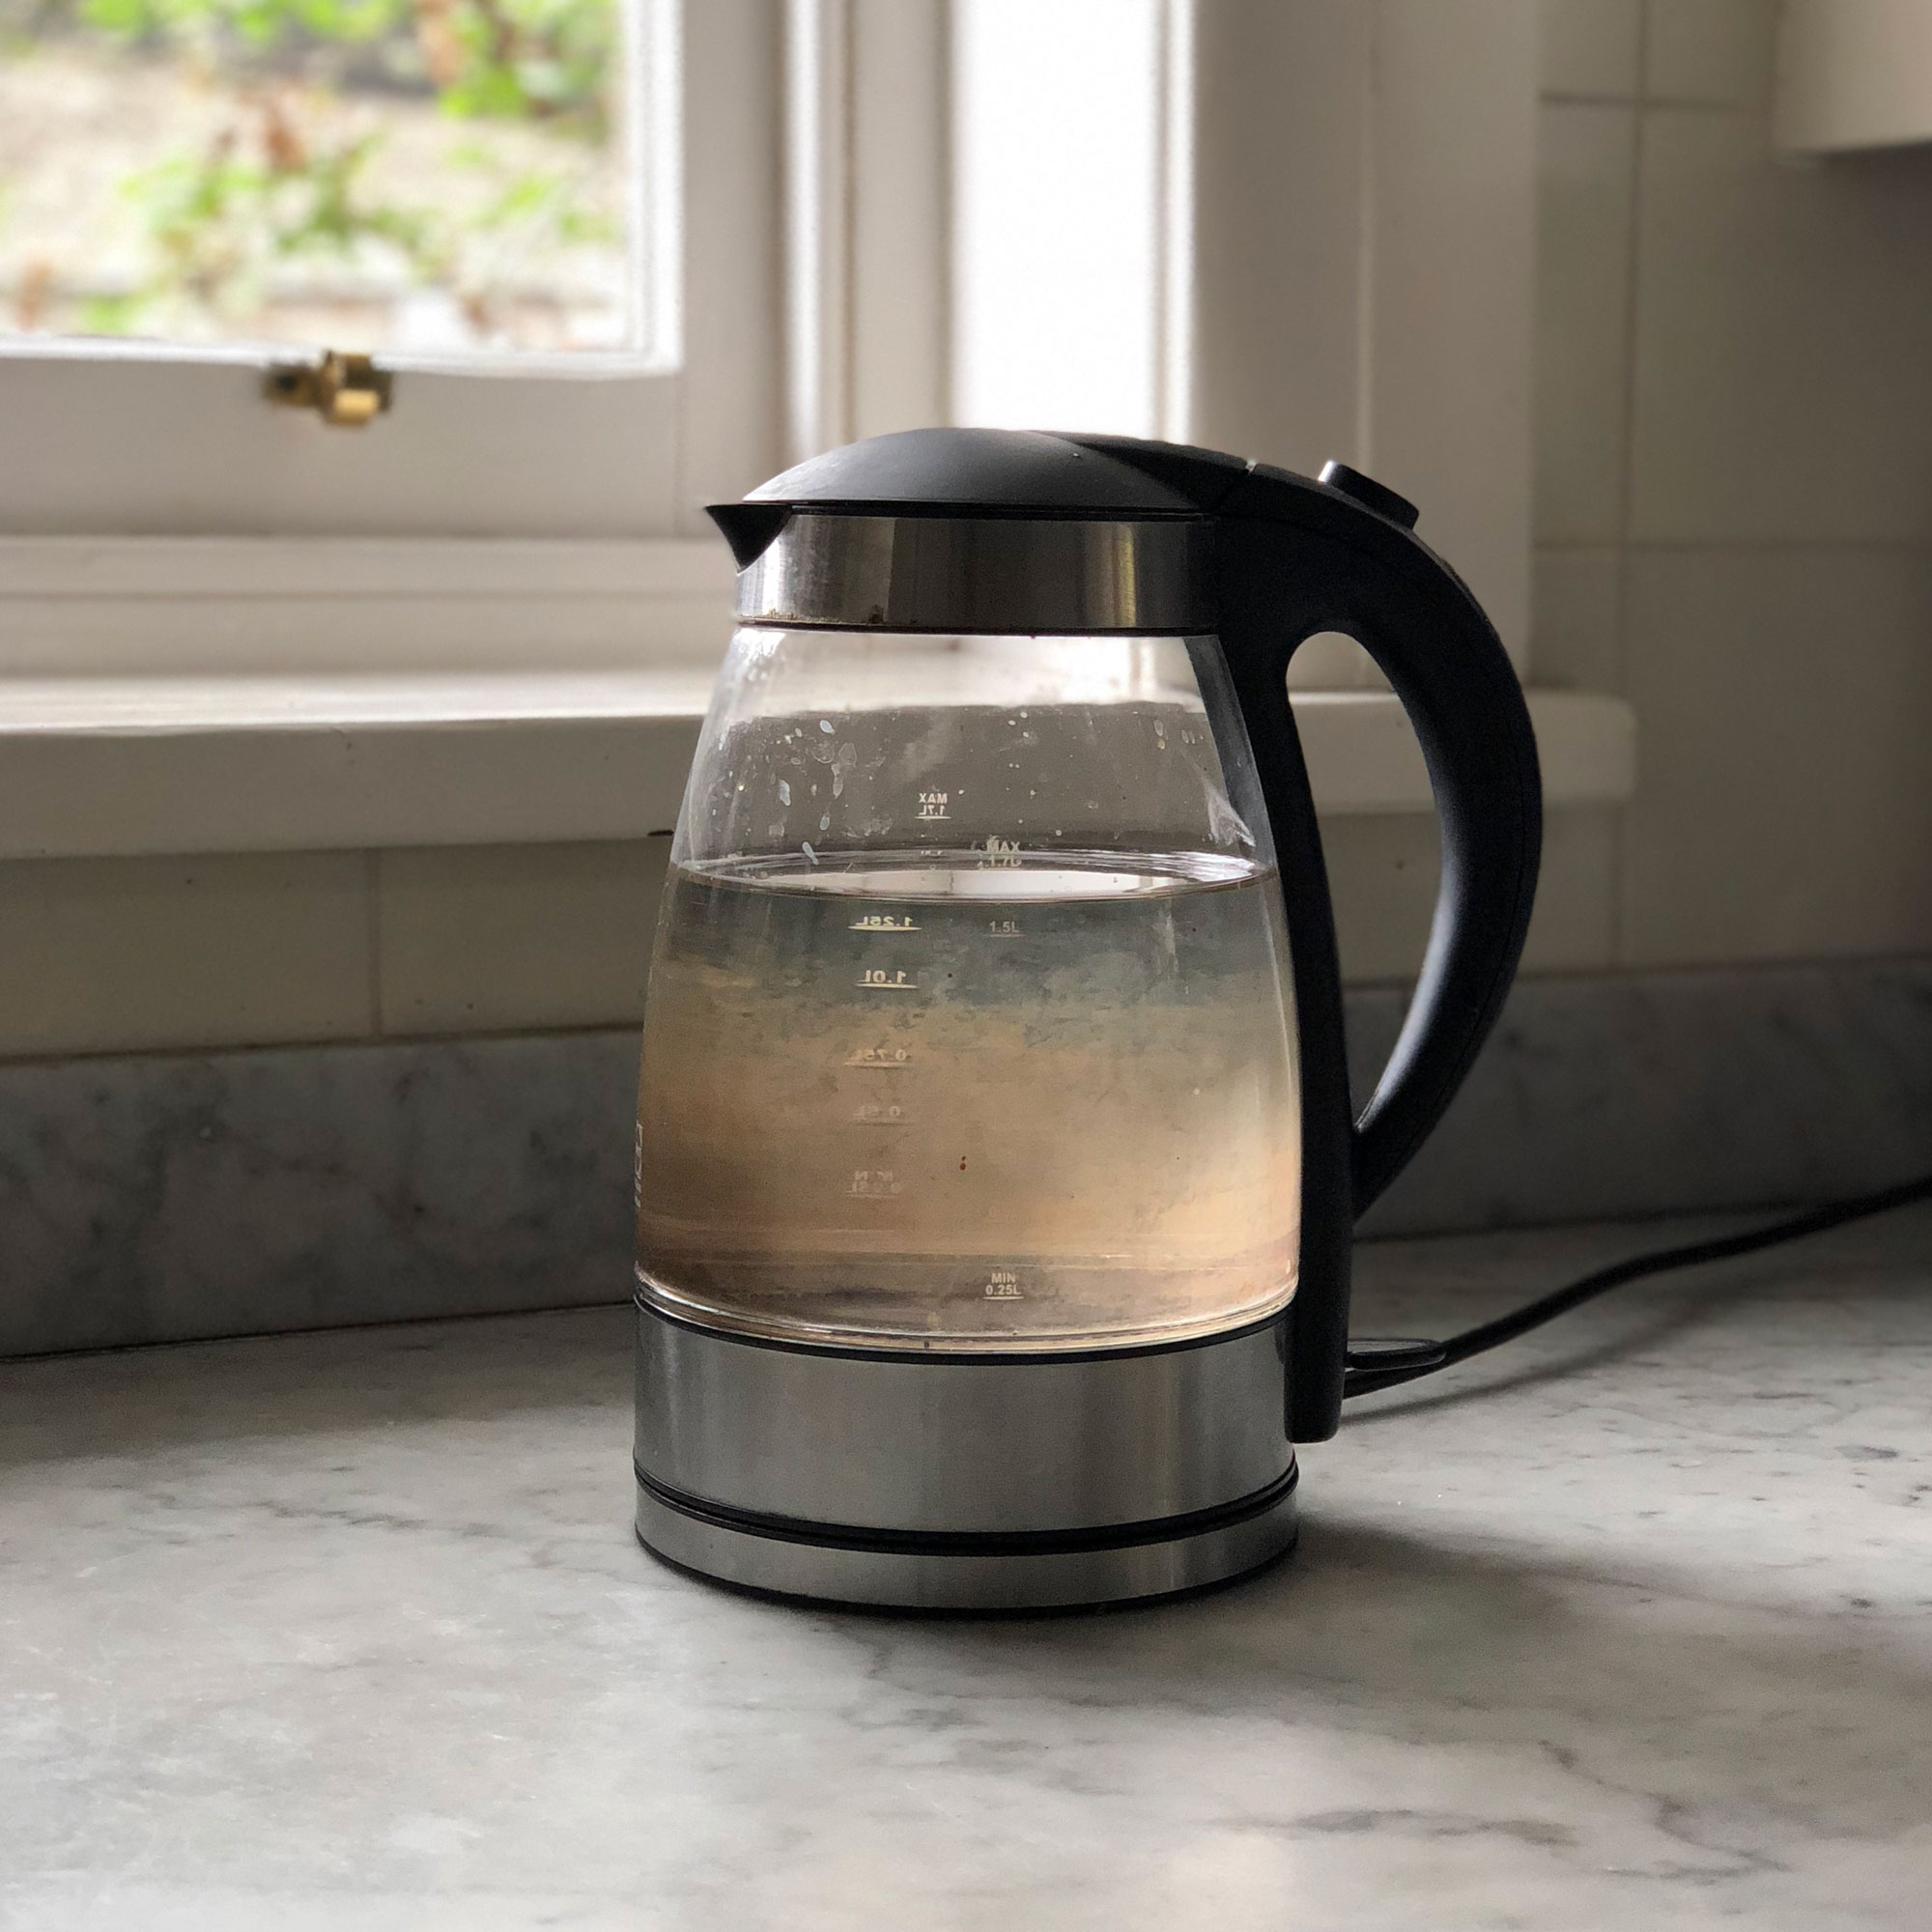 https://images.airtasker.com/v7/https://www.airtasker.com/blog/wp-content/uploads/2018/10/clear-kettle-with-limescale-airtasker.jpg